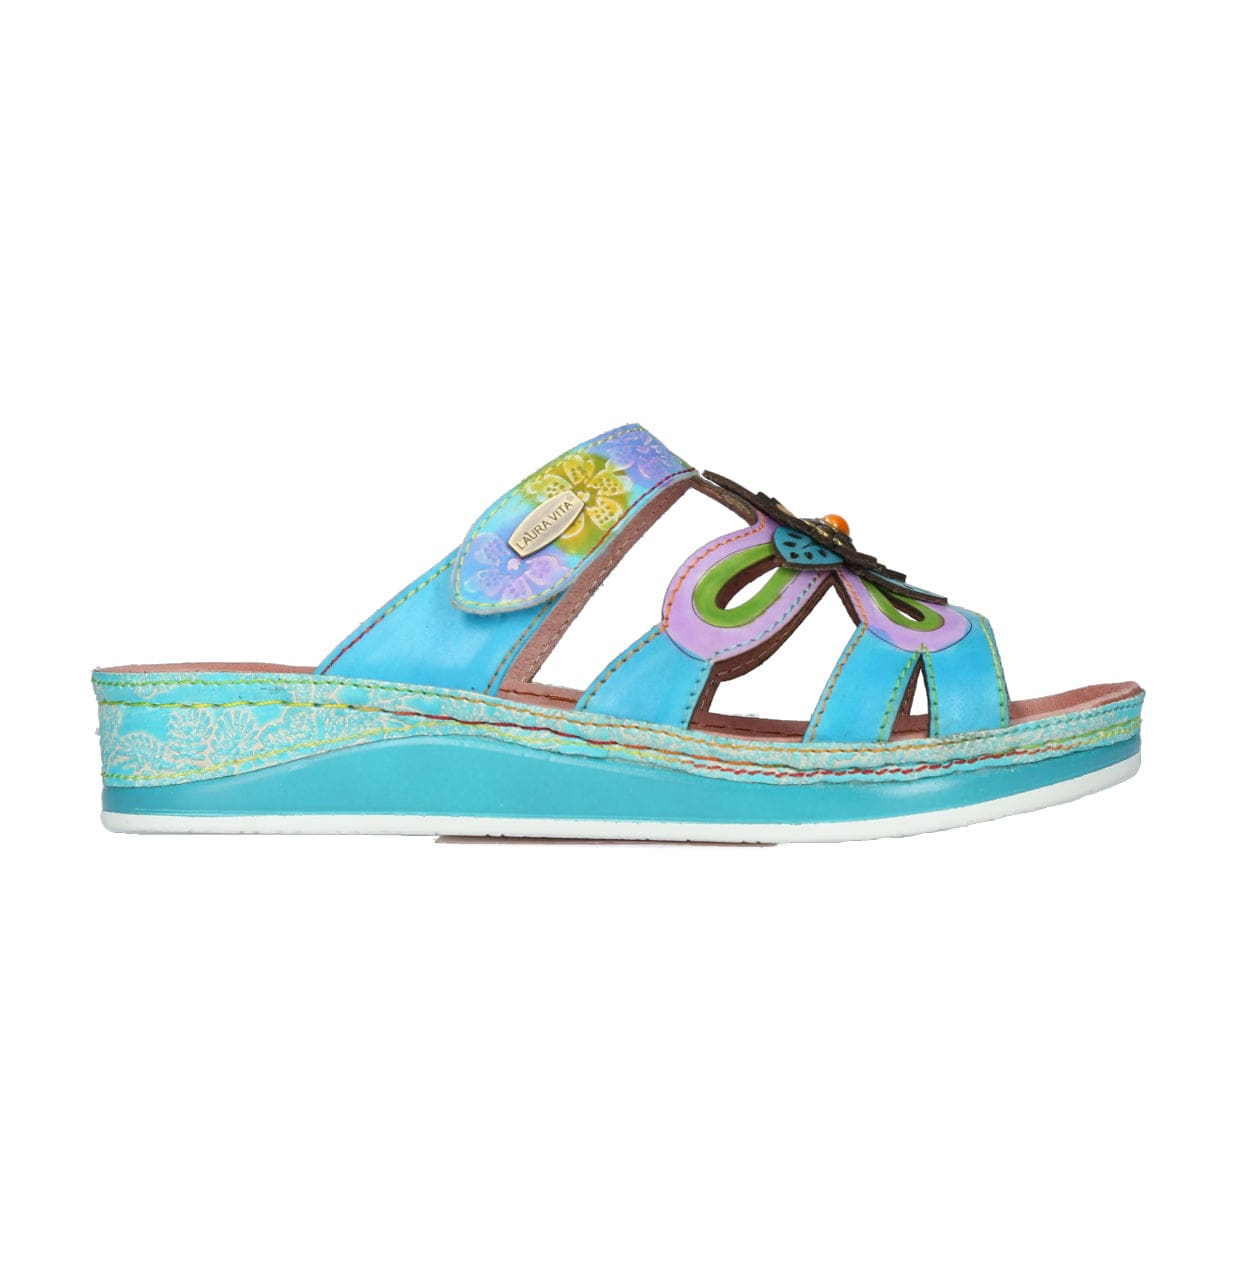 Chaussures BRCUELO 103 - 35 / Turquoise - Mule